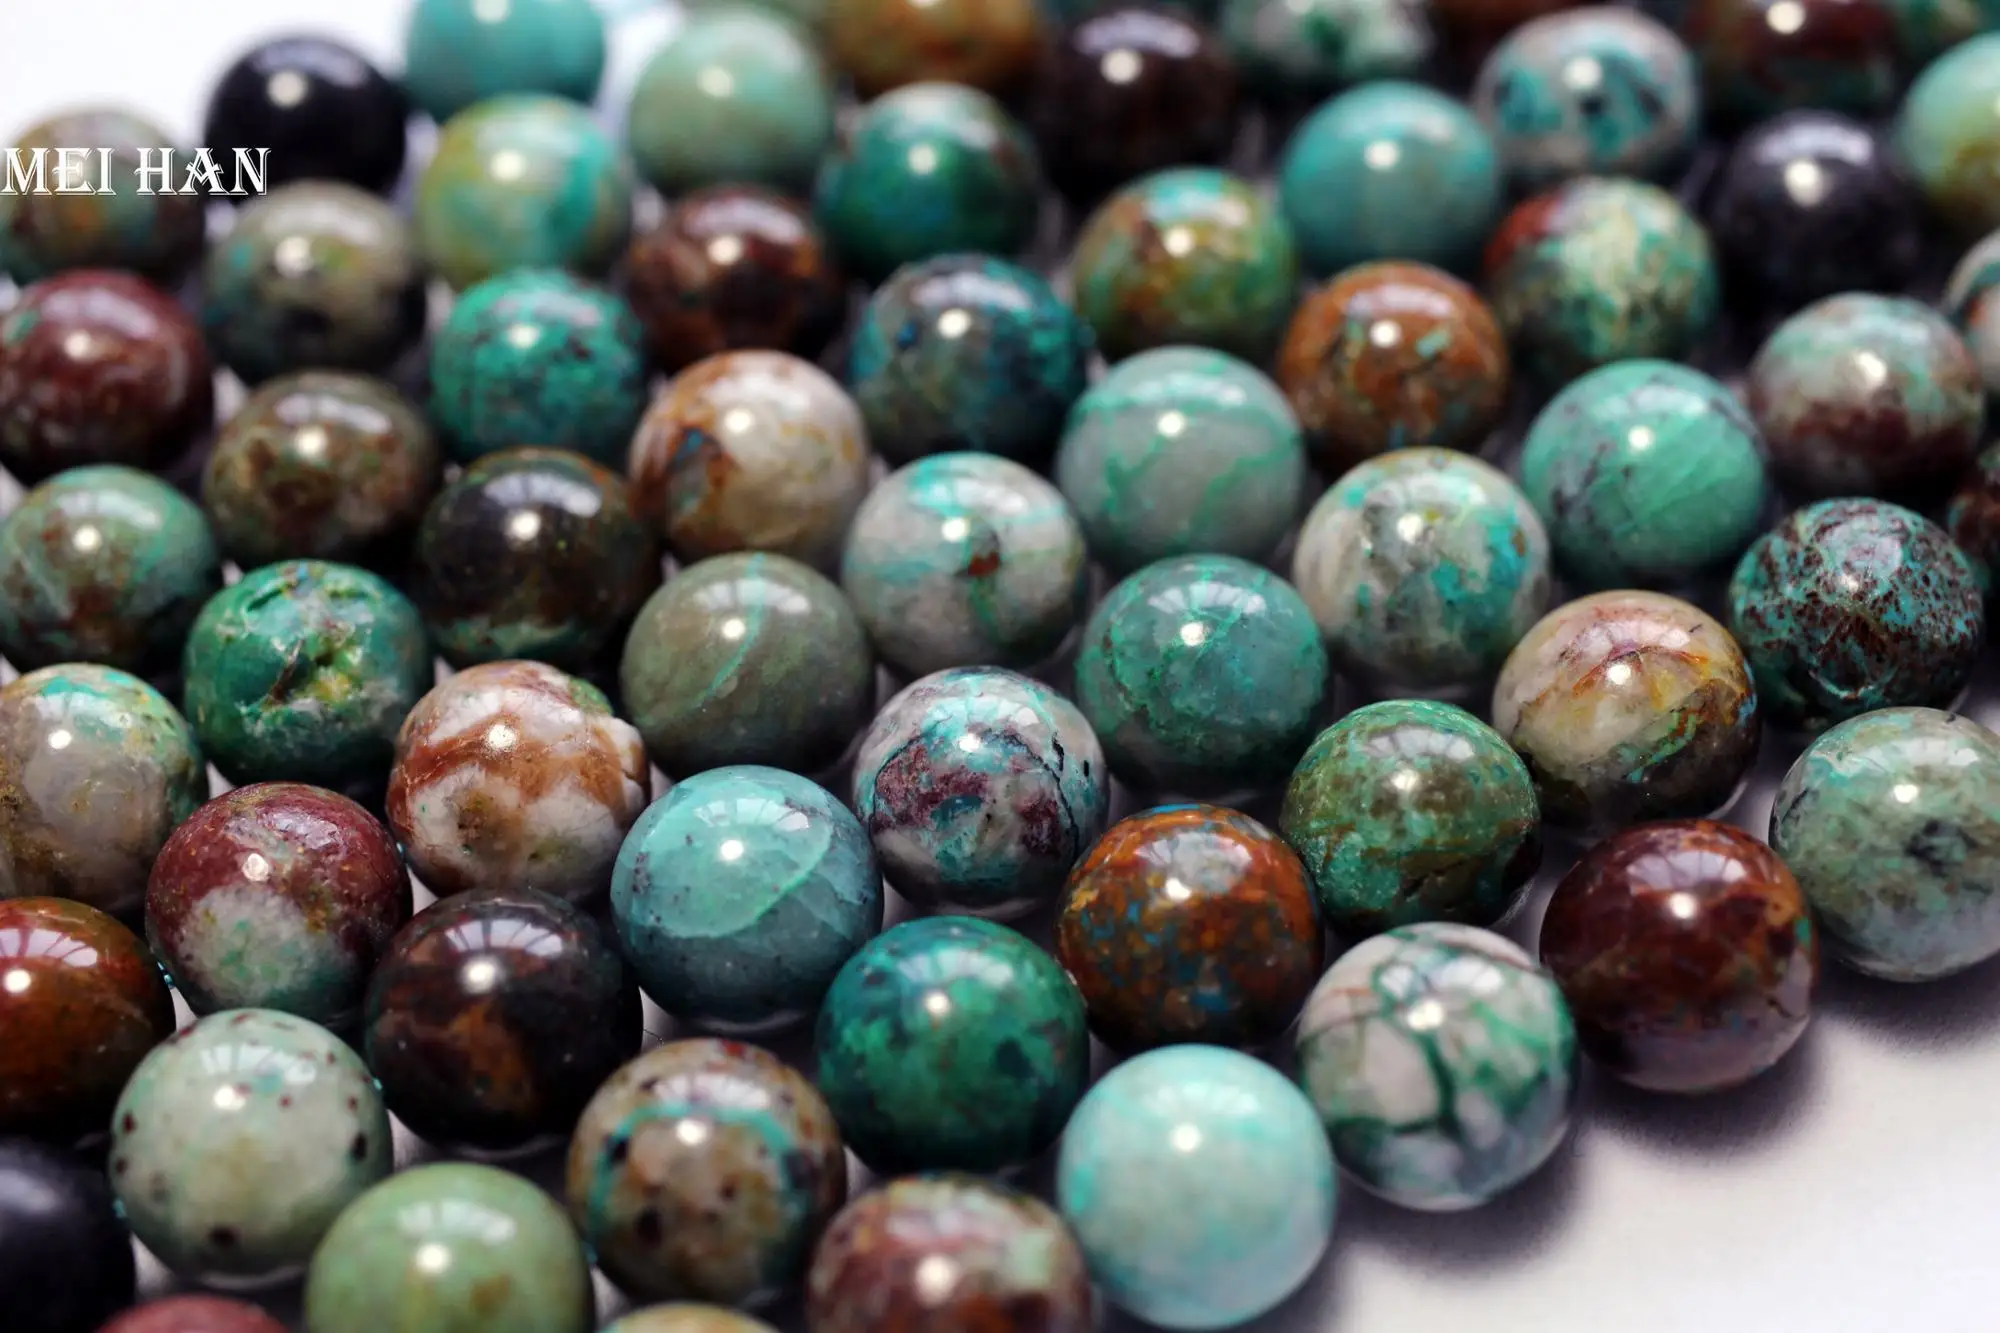 Trek Afgeschaft Romantiek Wholesale Natural Mineral A+ Chrysocolla 10mm Smooth Round Loose Gemstone  Beads Semi-precious Stonefor Jewelry Making Design Diy - Buy Chrysocolla  Beads,Phoenix Stone Beads,Chrysocolla Stone Product on Alibaba.com